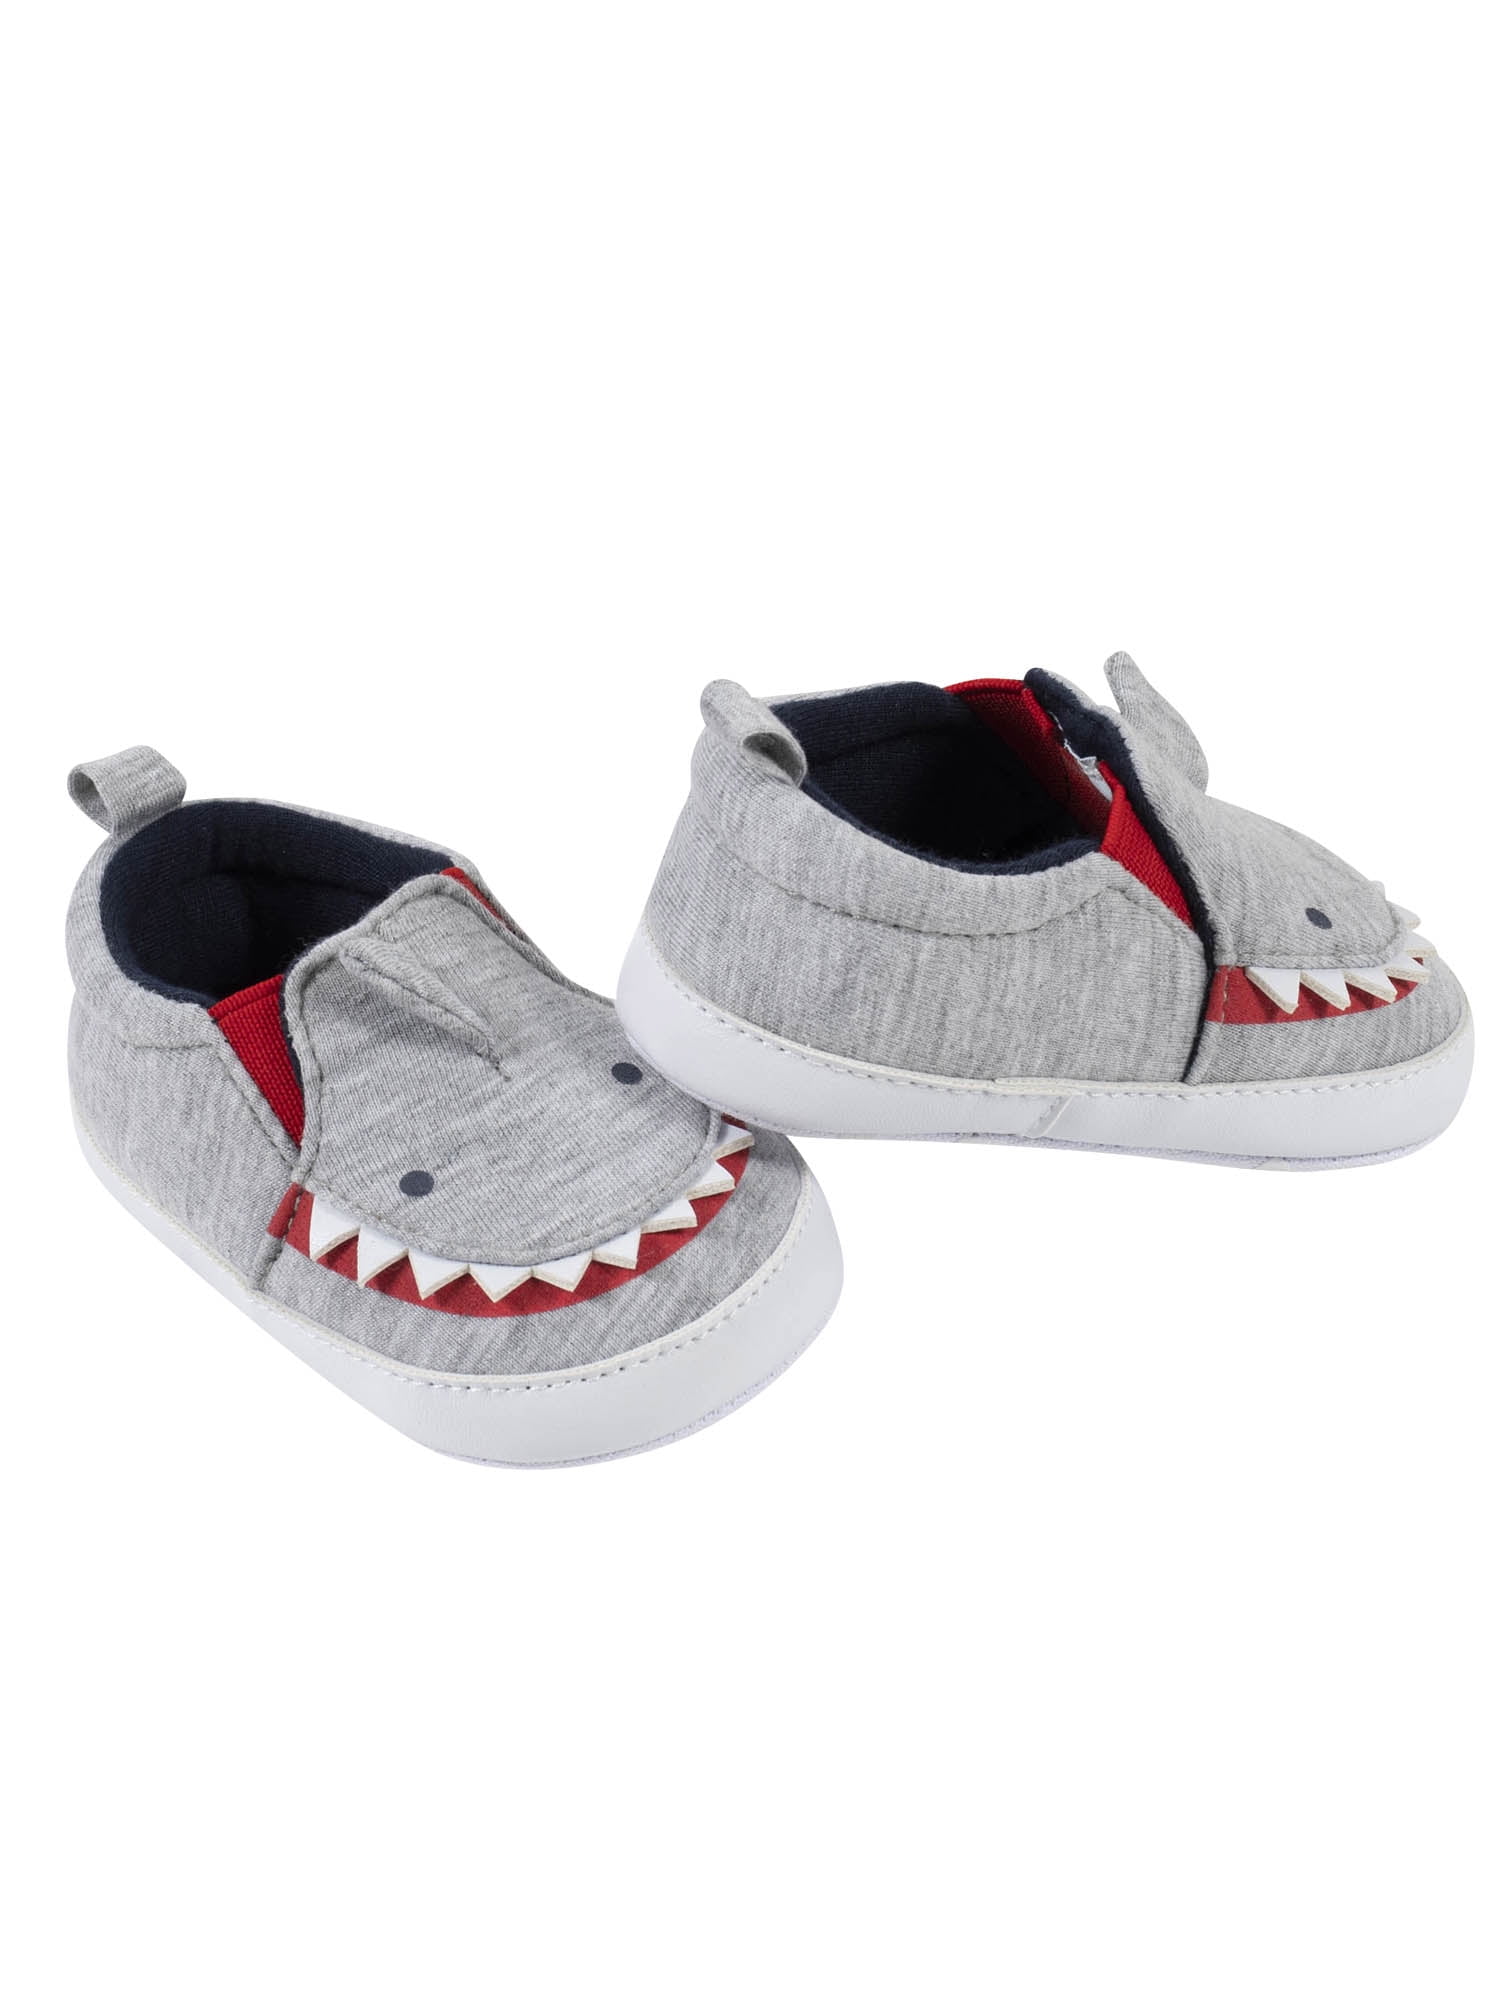 Unisex Canvas Baby/Infant/ Baby shower Soft touch shoes sizes 6 9 12months 